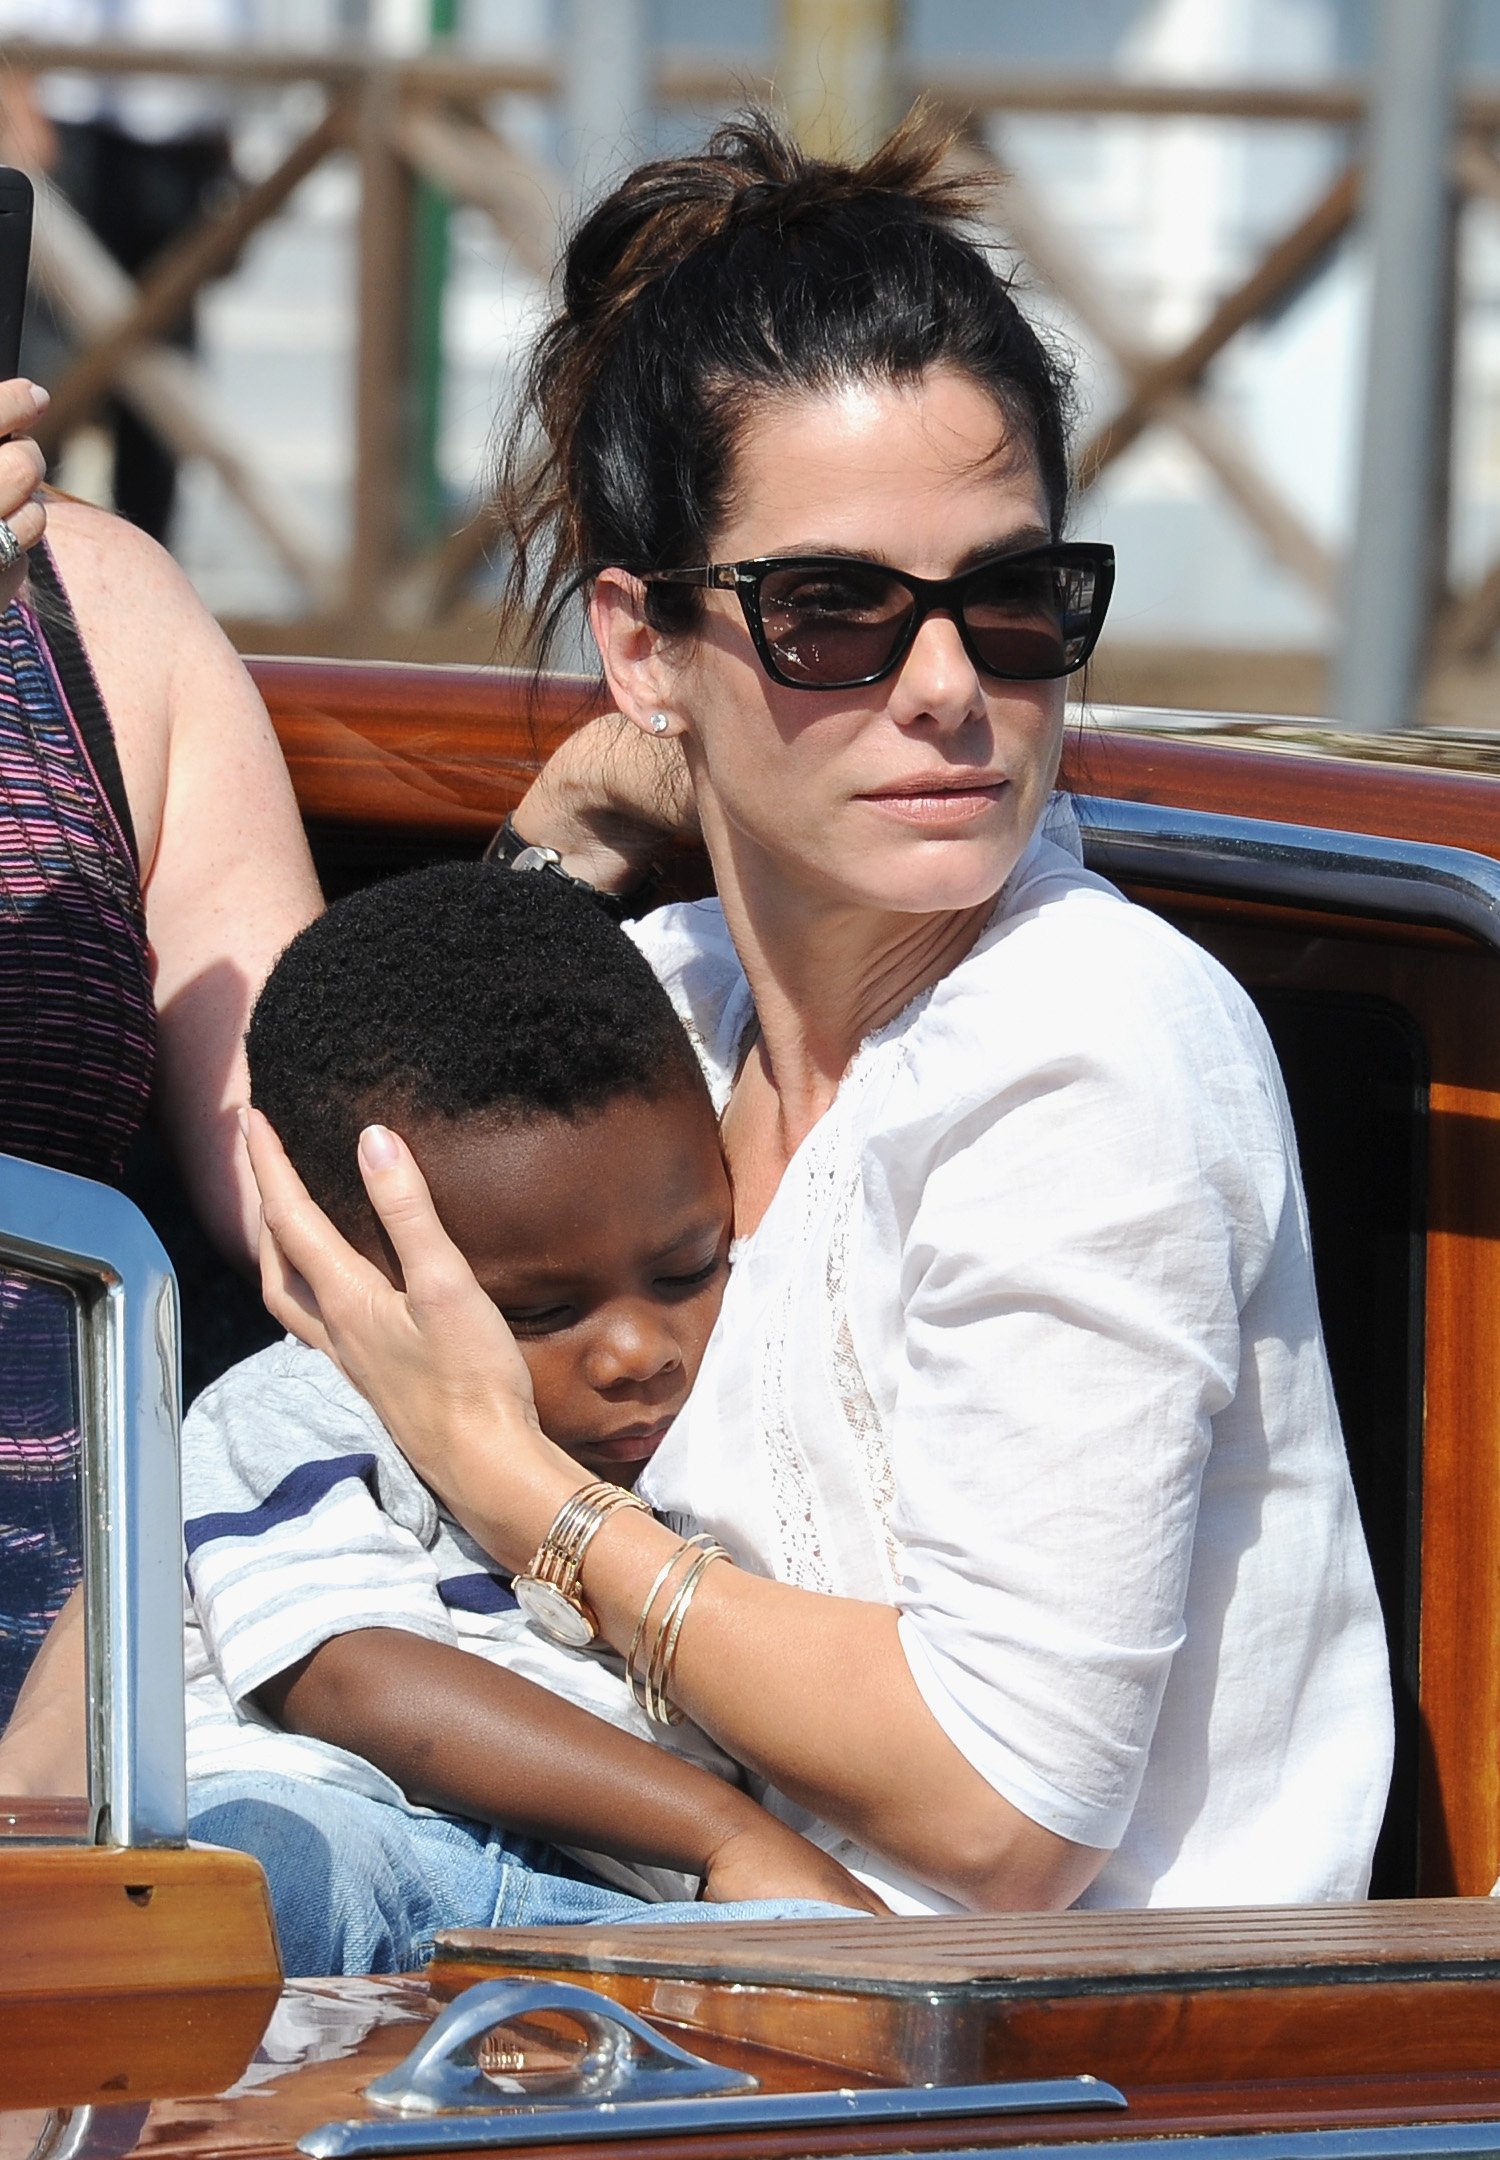 Sandra Bullock and son Louis Bullock during the 70th Venice International Film Festival on August 27, 2013 in Venice, Italy. | Source: Getty Images